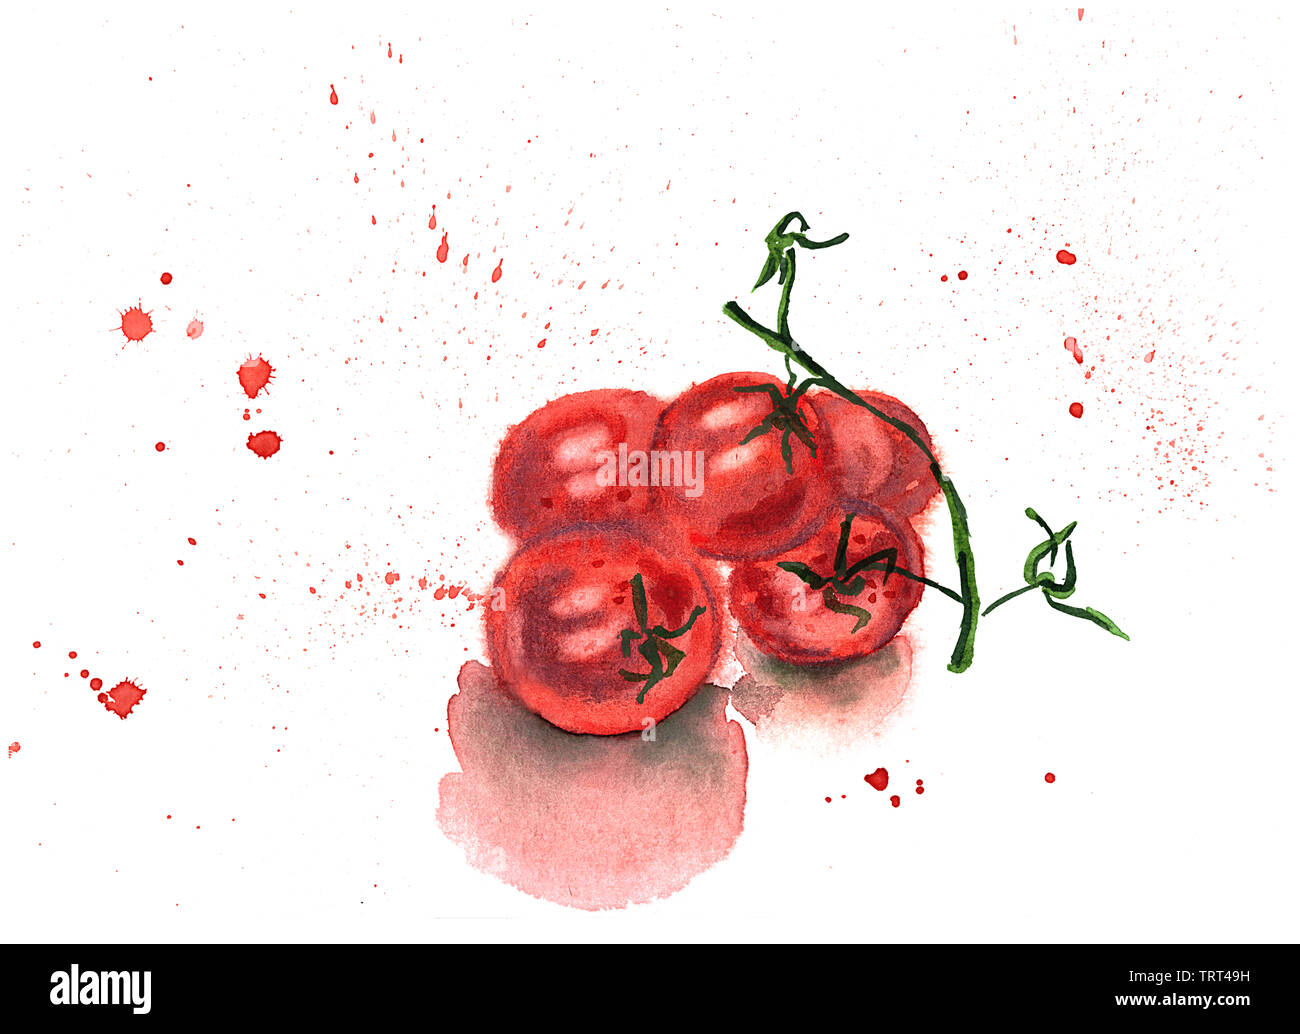 Watercolor hand drawing sketch illustration of branch of red ripe tomatoes with red spray on white backgroud Stock Photo